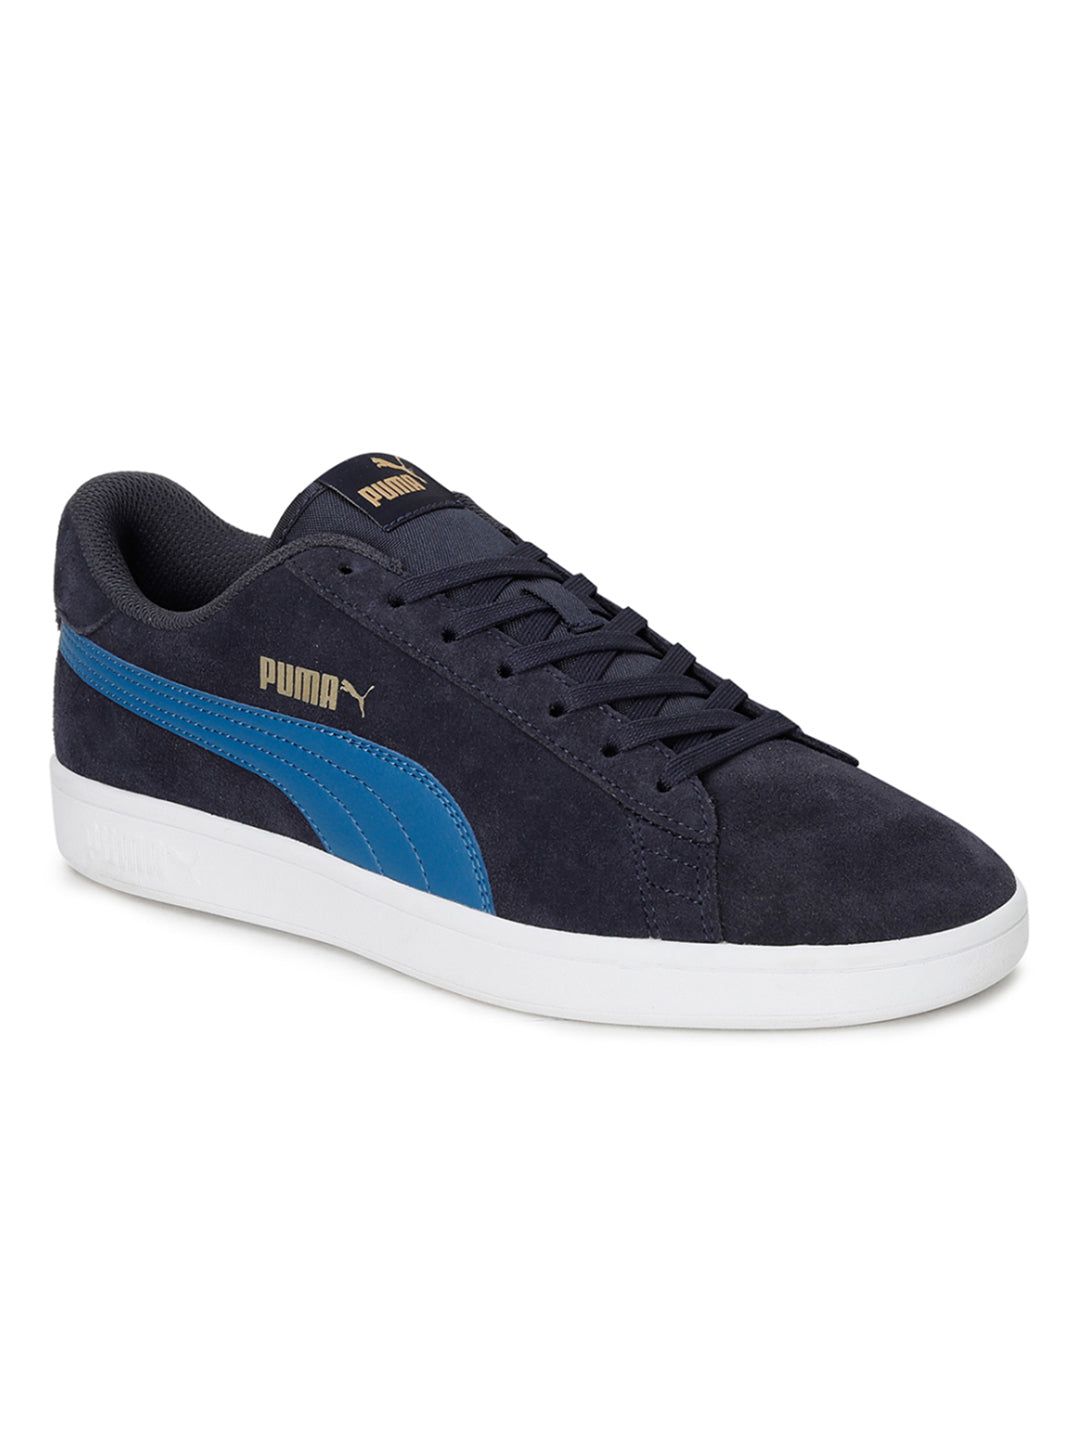 Buy Unisex Blue and White Puma Smash v2 Sneakers From Fancode Shop